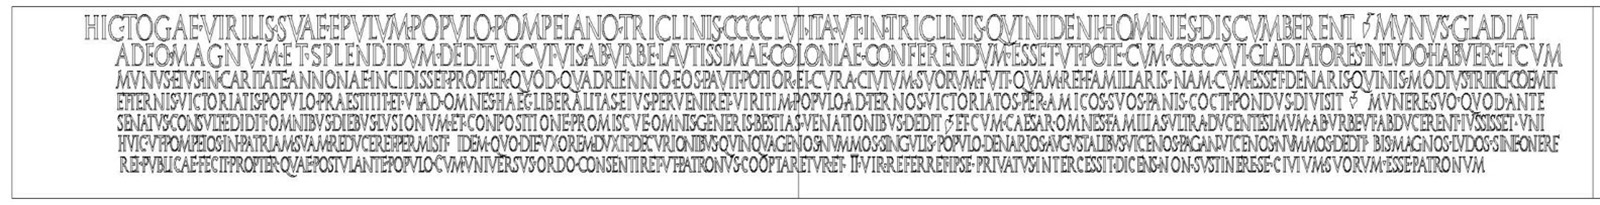 SG6 Pompeii. Transcript of the inscription showing the 7 rows. Photograph © Parco Archeologico di Pompei.
See Journal of Roman Archaeology: vol. 31 (2018), pp. 310-322, fig. 4.

